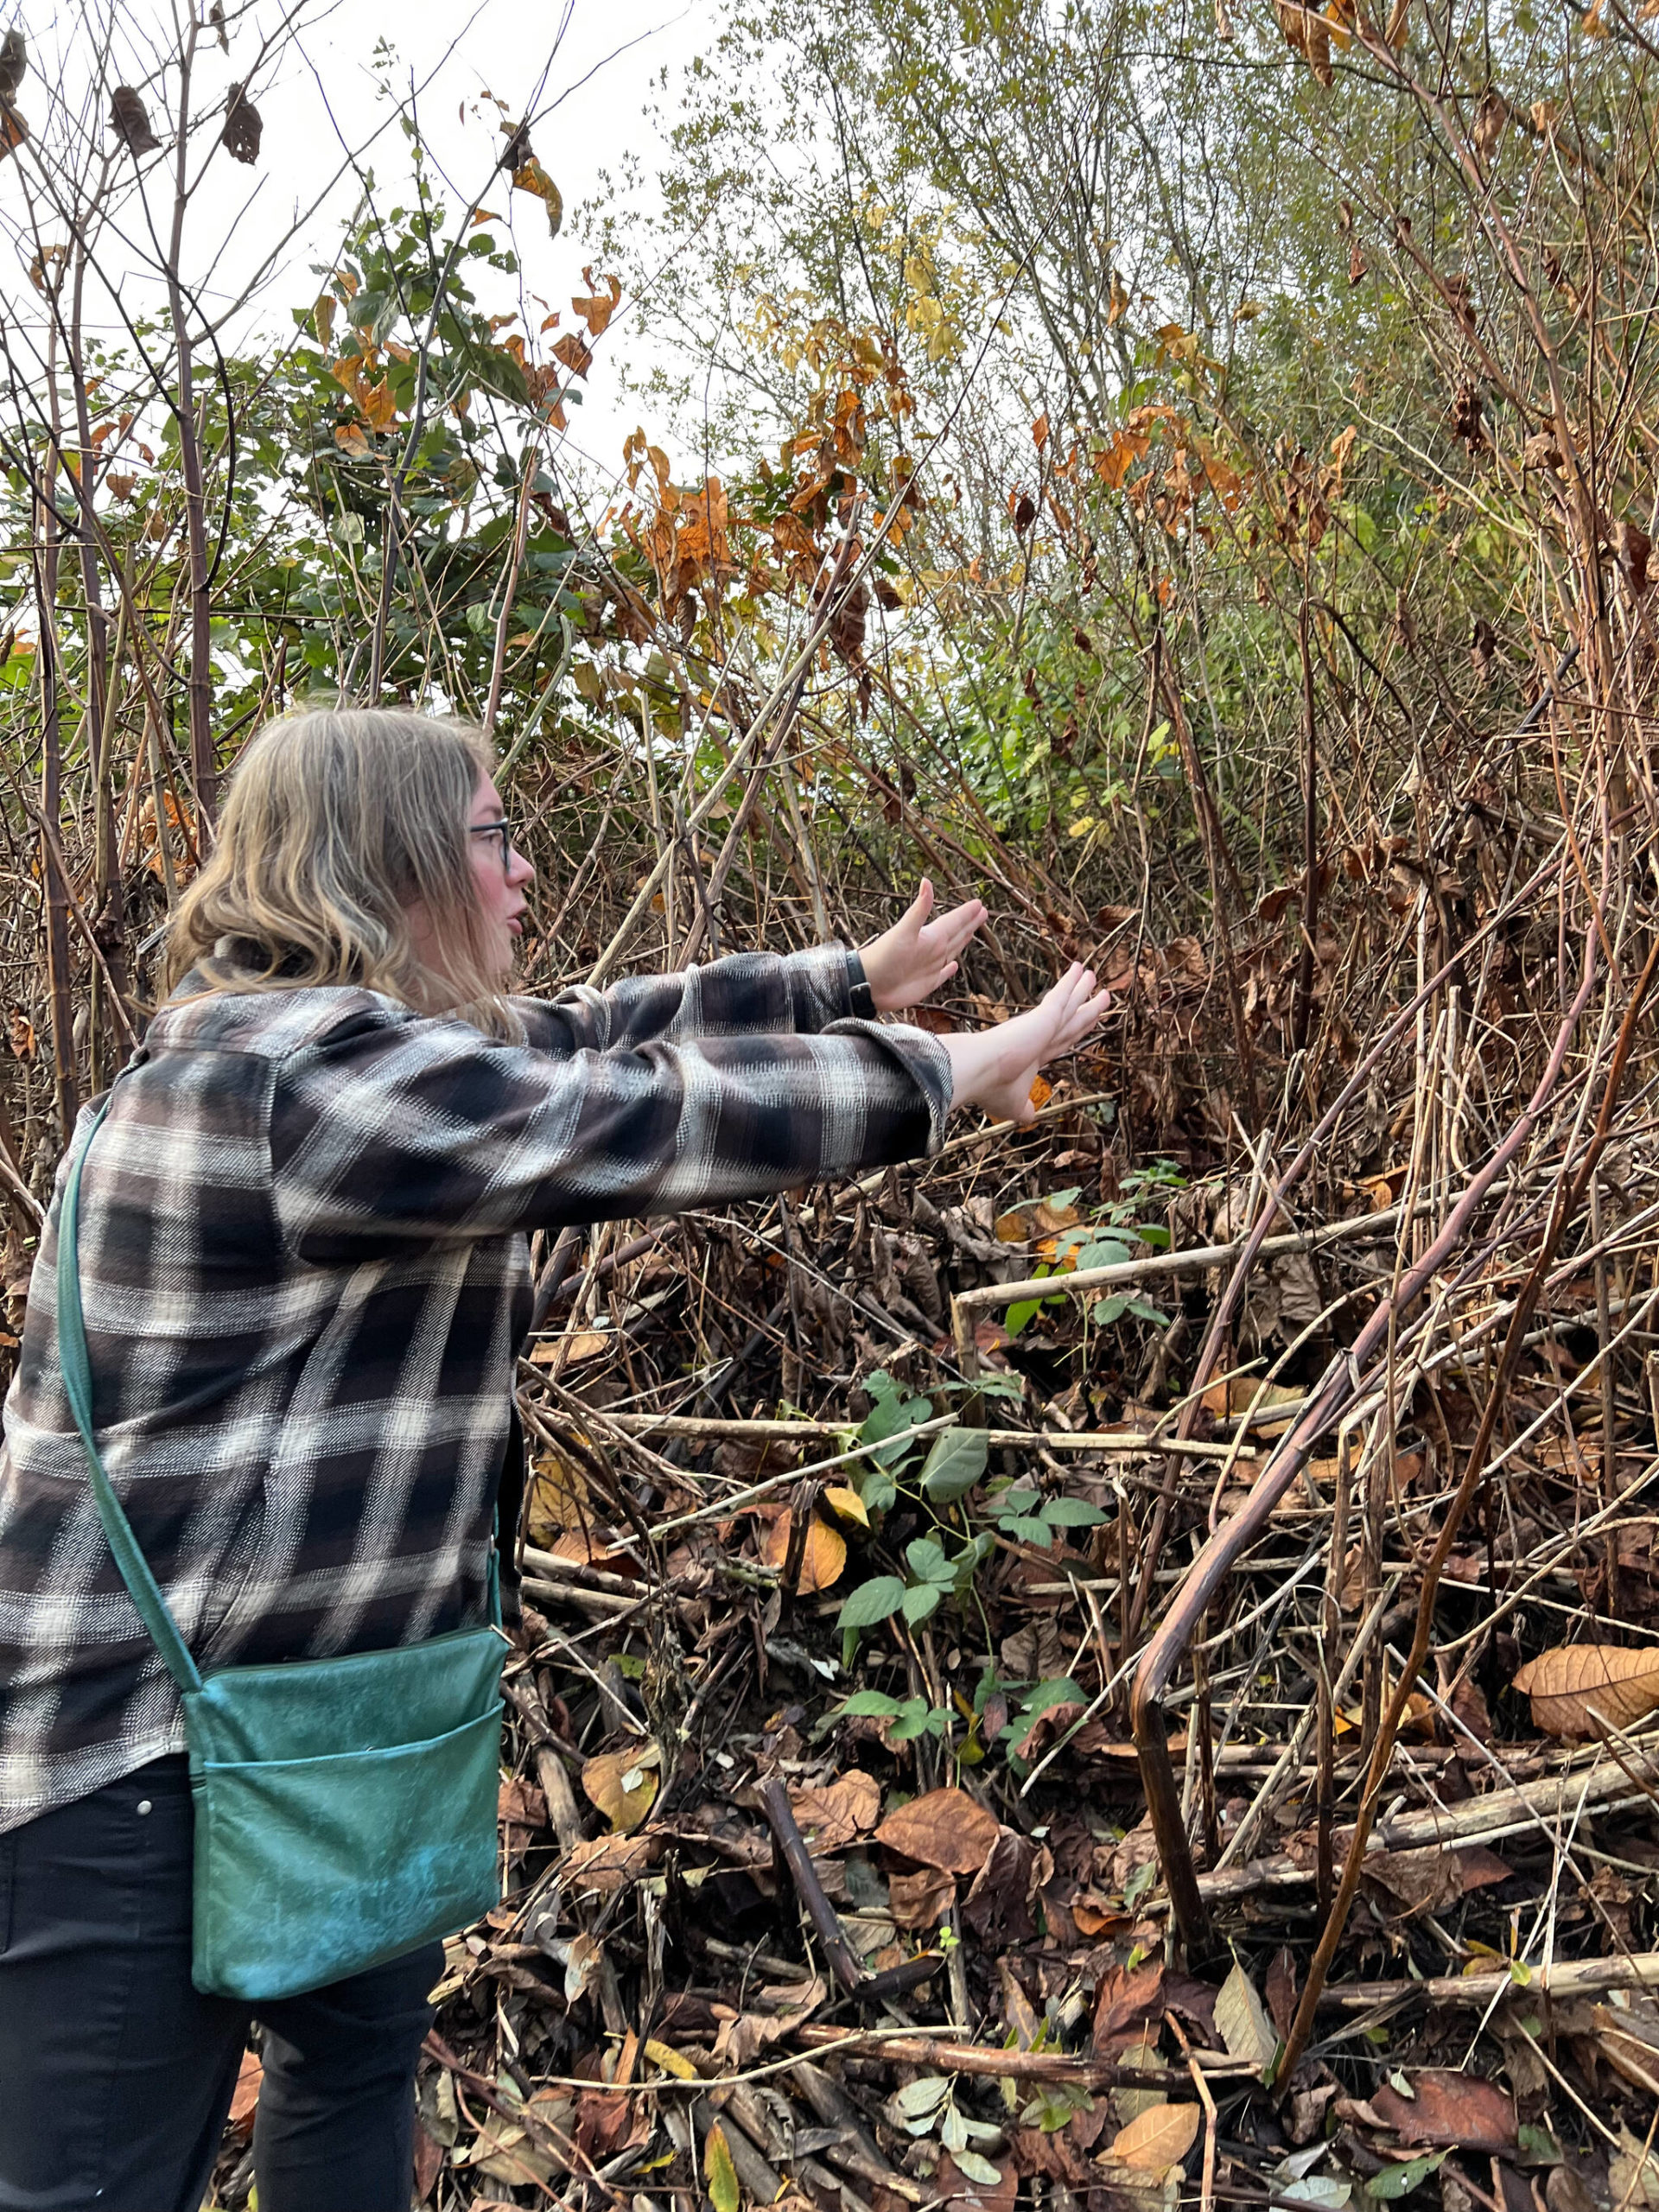 Kelsey Sapp, who worked on the county's weed control crew at "knotweed alley" this summer, describes how she battled through thick knotweed stalks while spraying the invasive weeds with herbicide. (Clayton Franke / The Daily World)